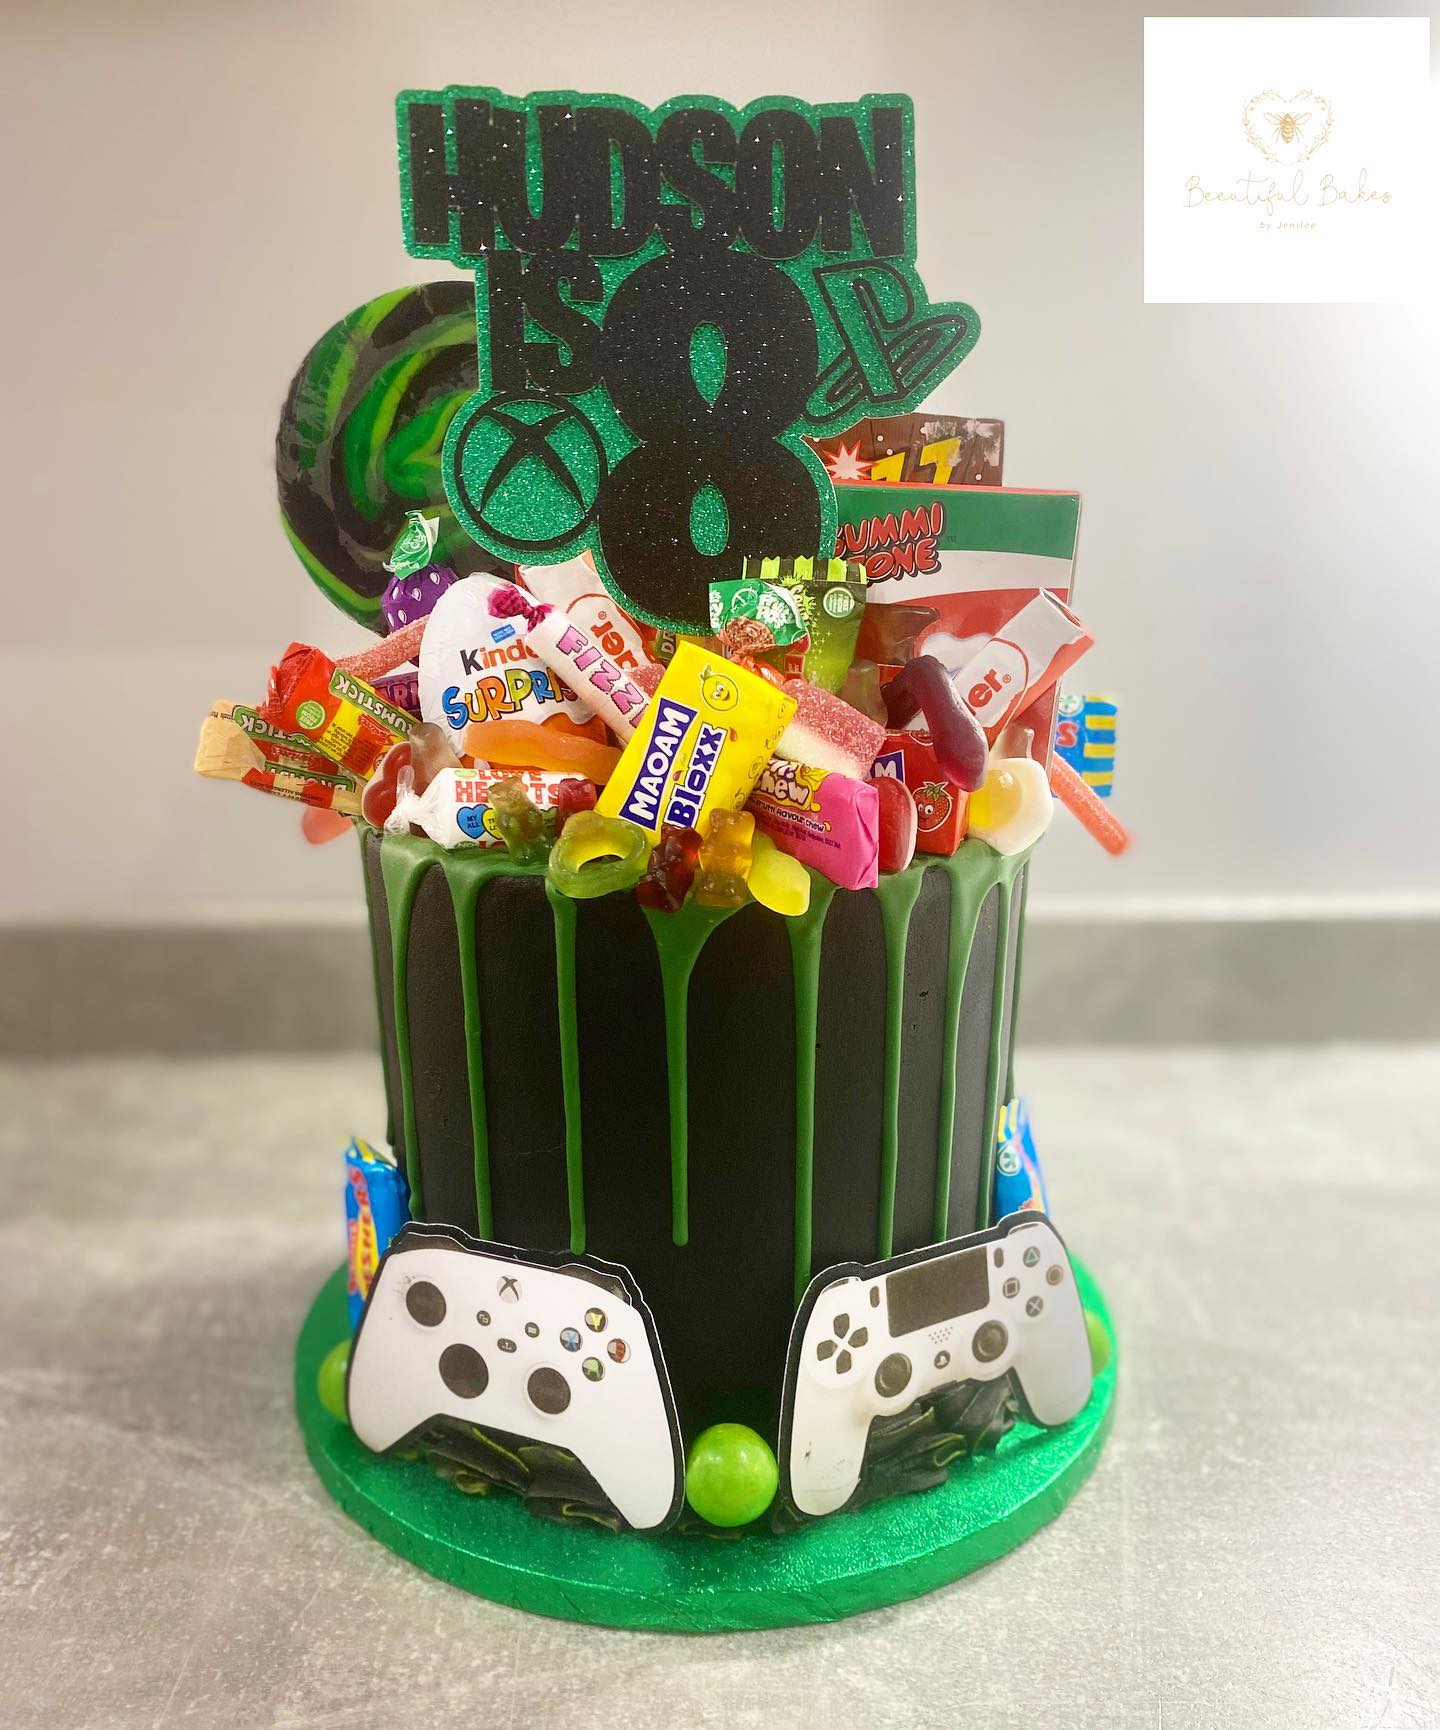 Computer & Gaming Themed Cakes | The Fairy Cake Mother